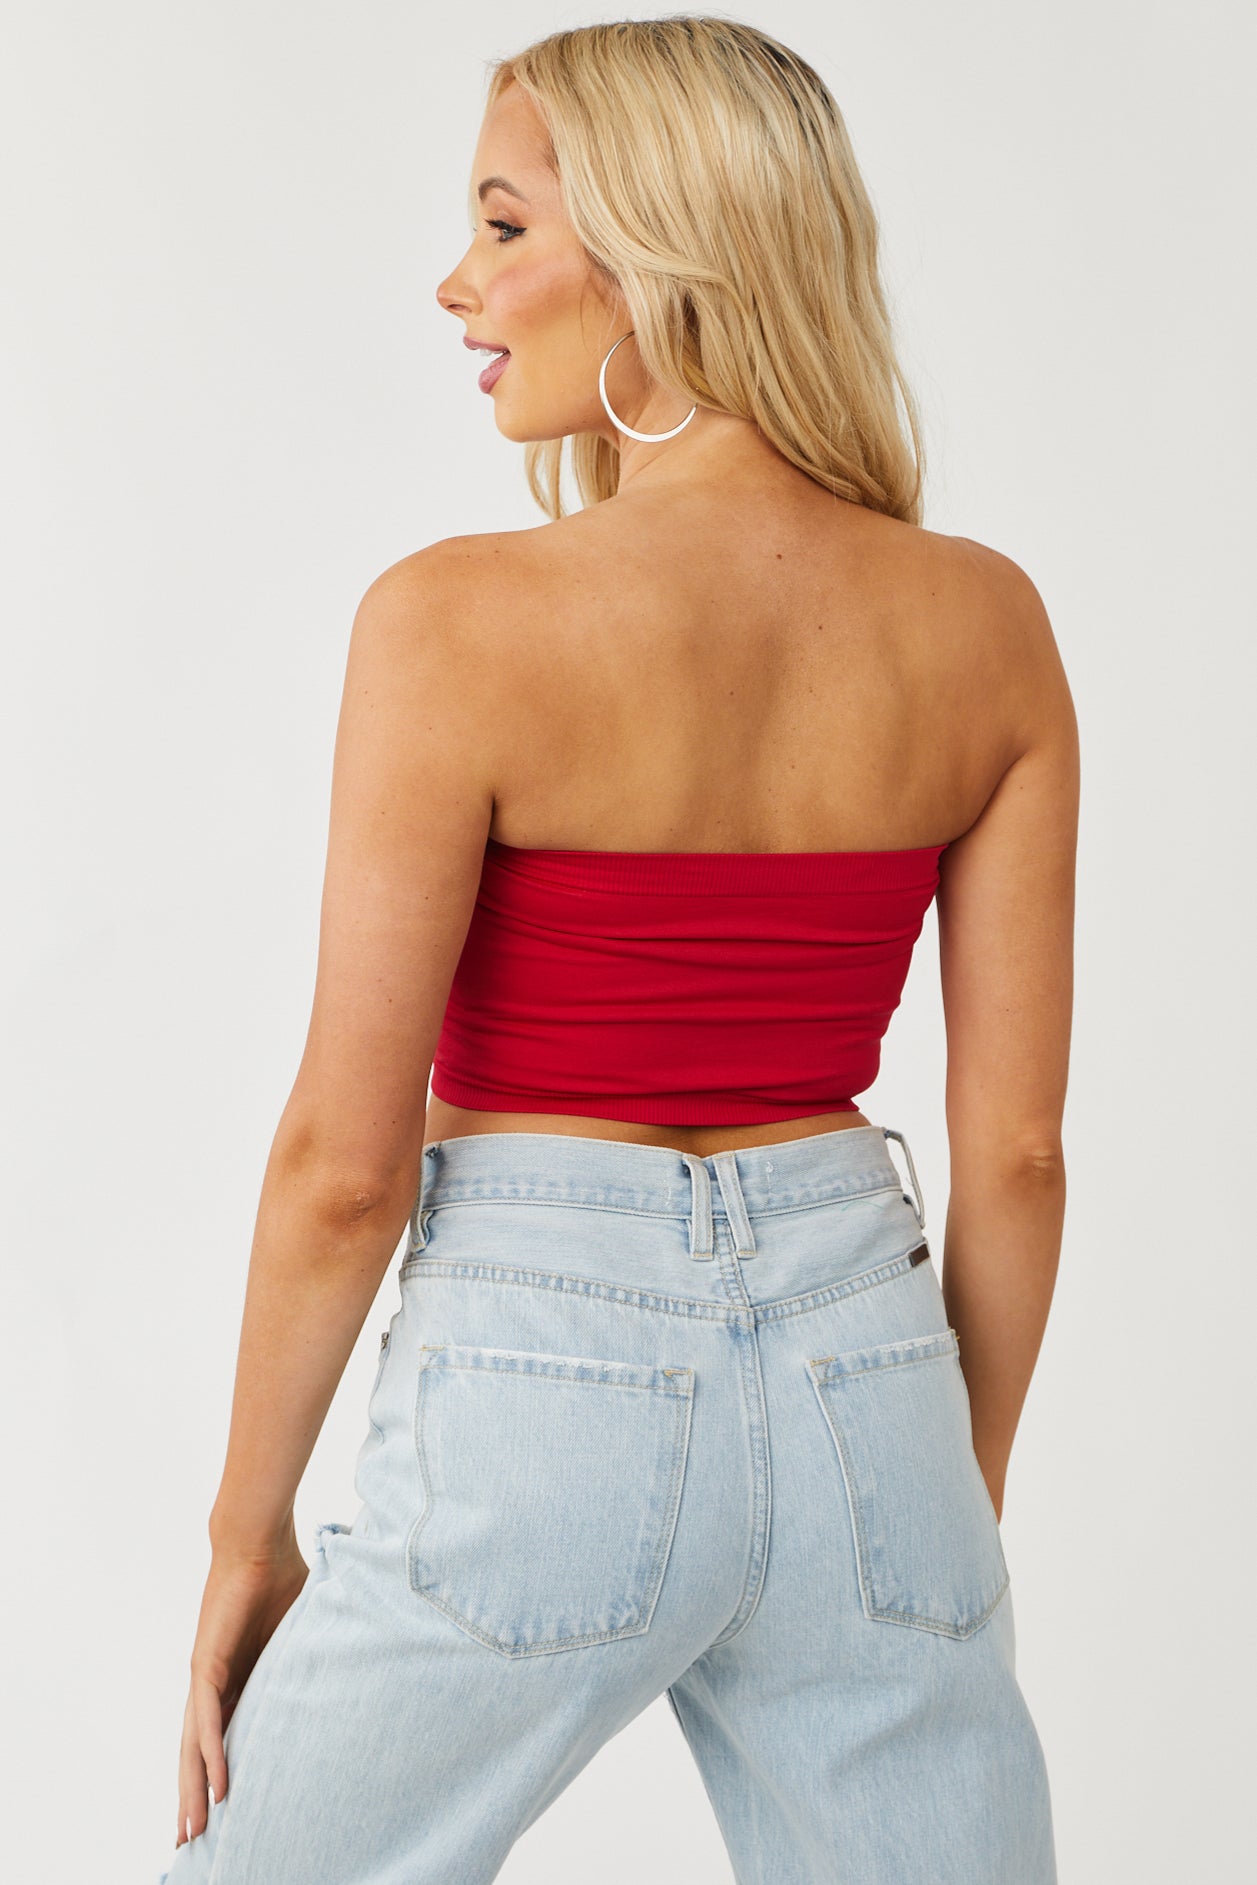 Cherry Solid Stretchy Knit Bandeau